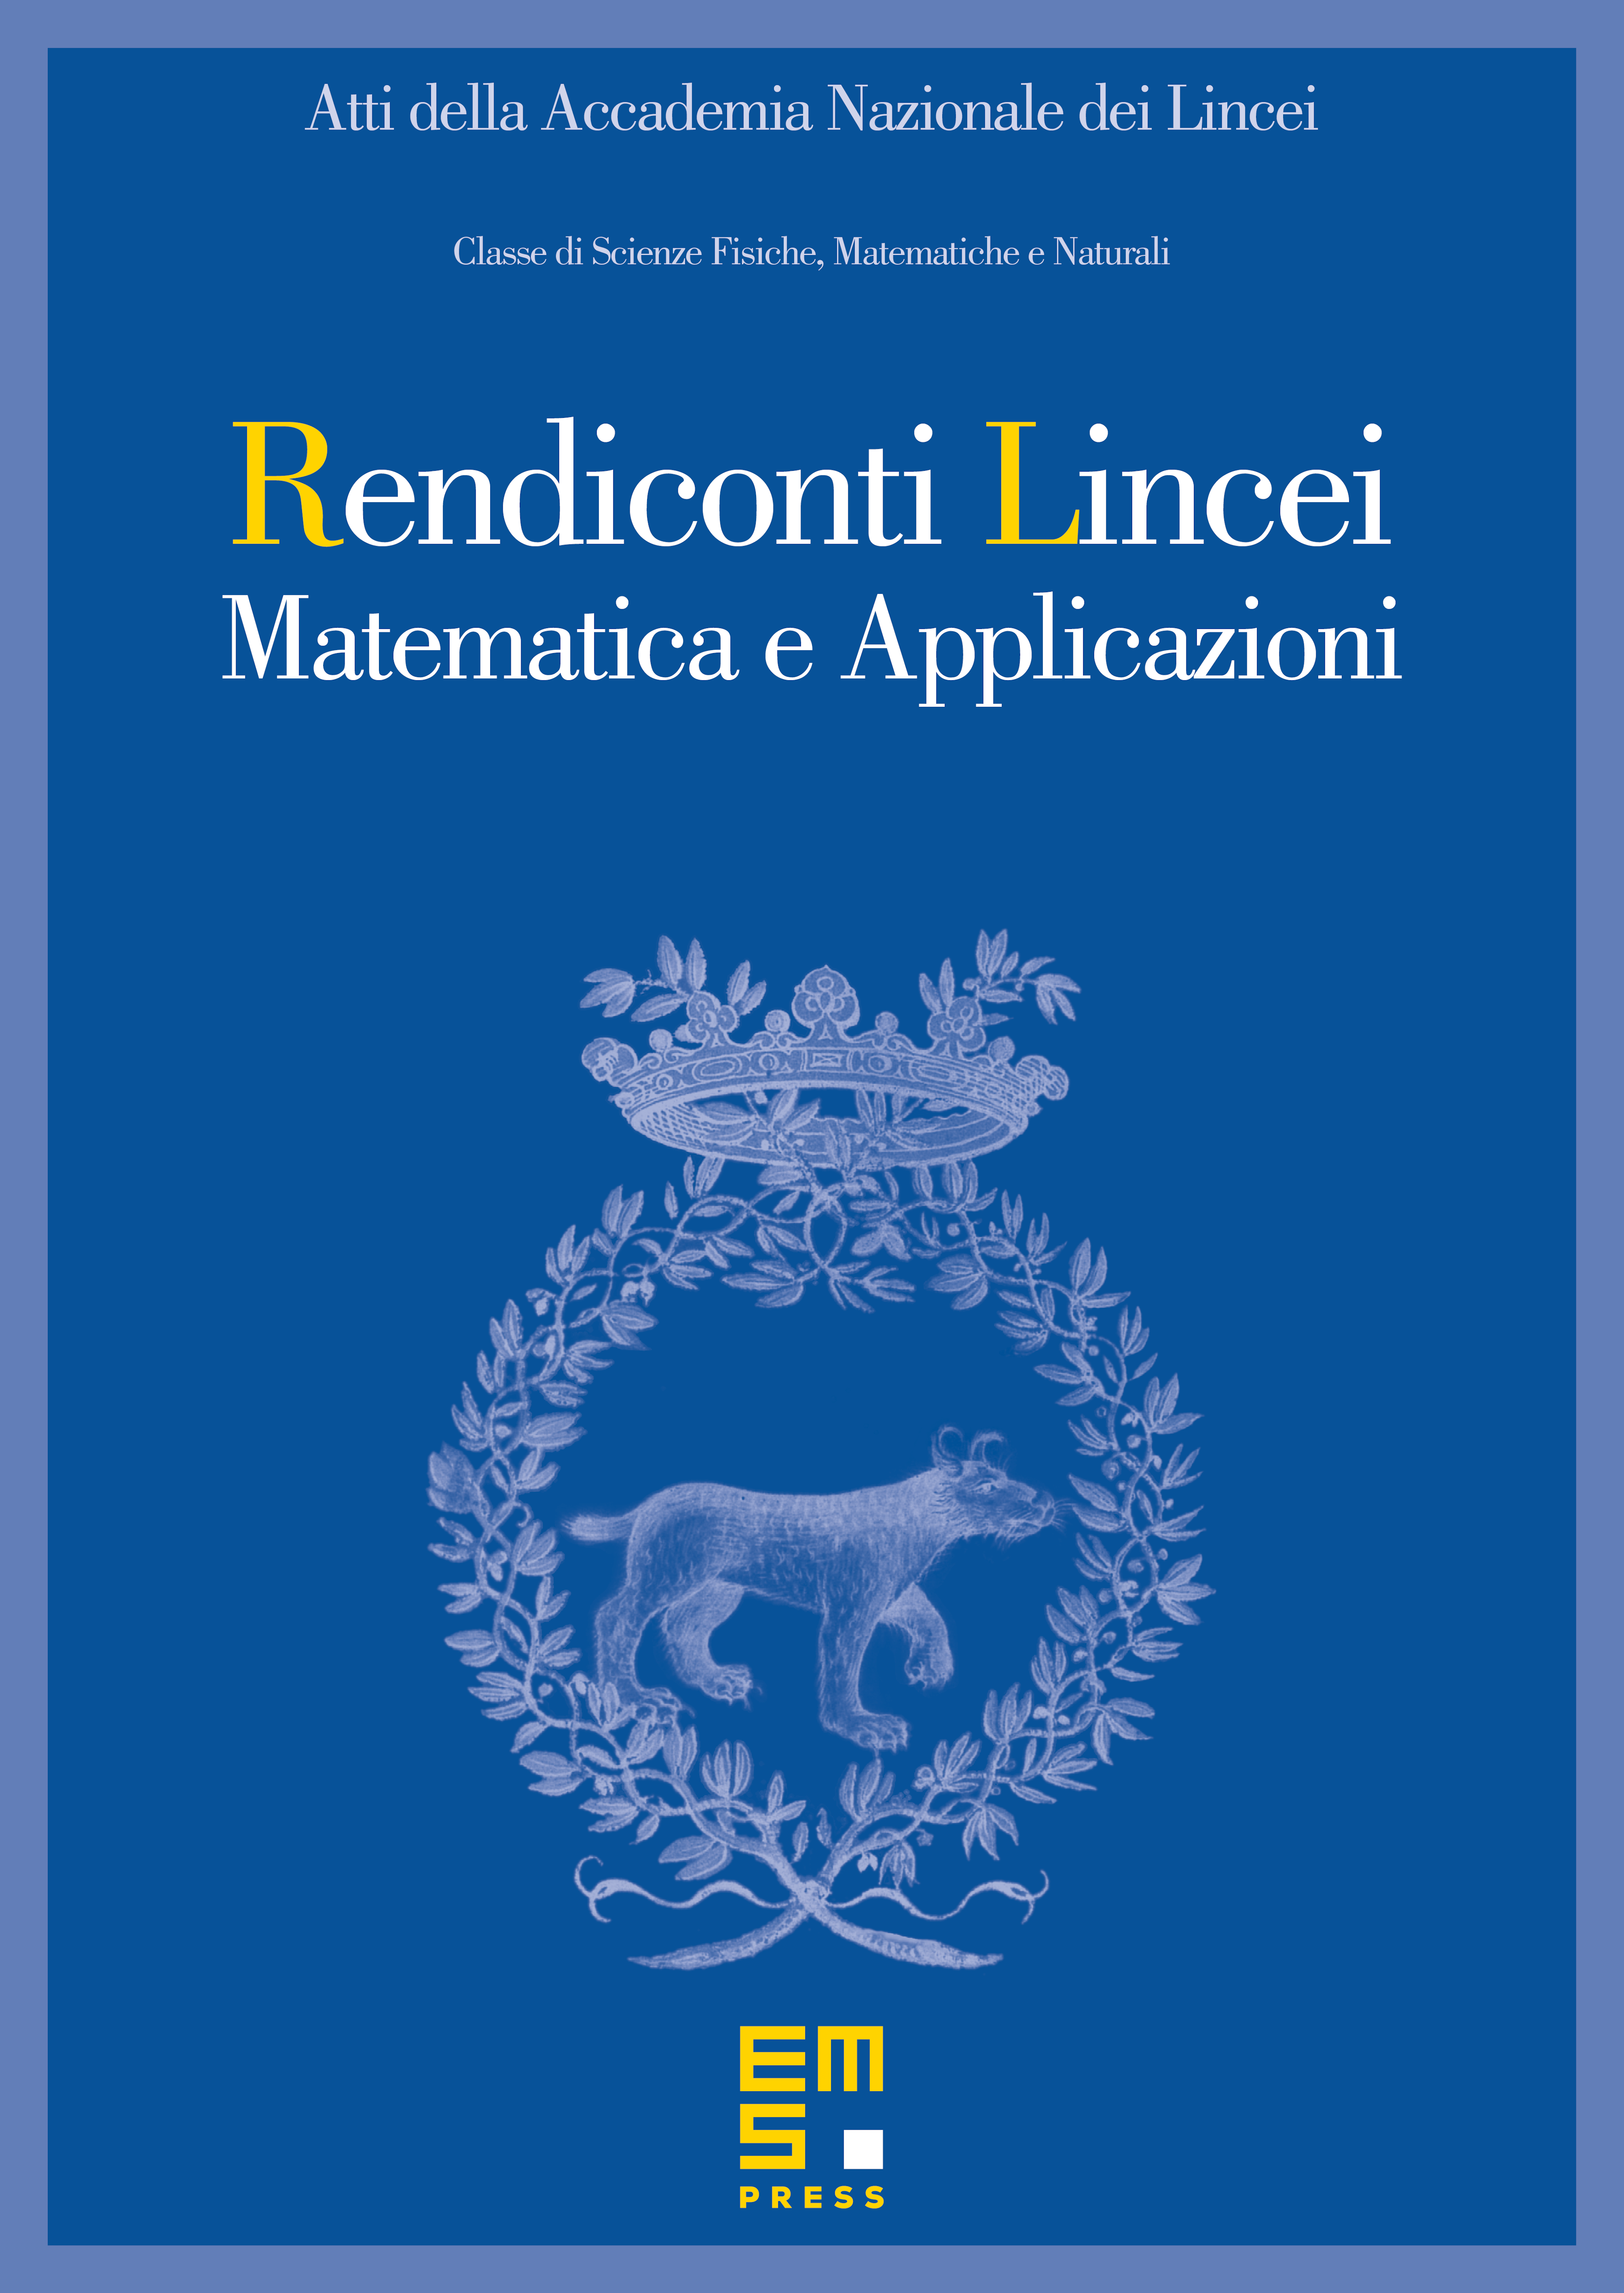 On Professor Grioli’s last riddle: What boundary and initial conditions make sense for microstructured continua? cover